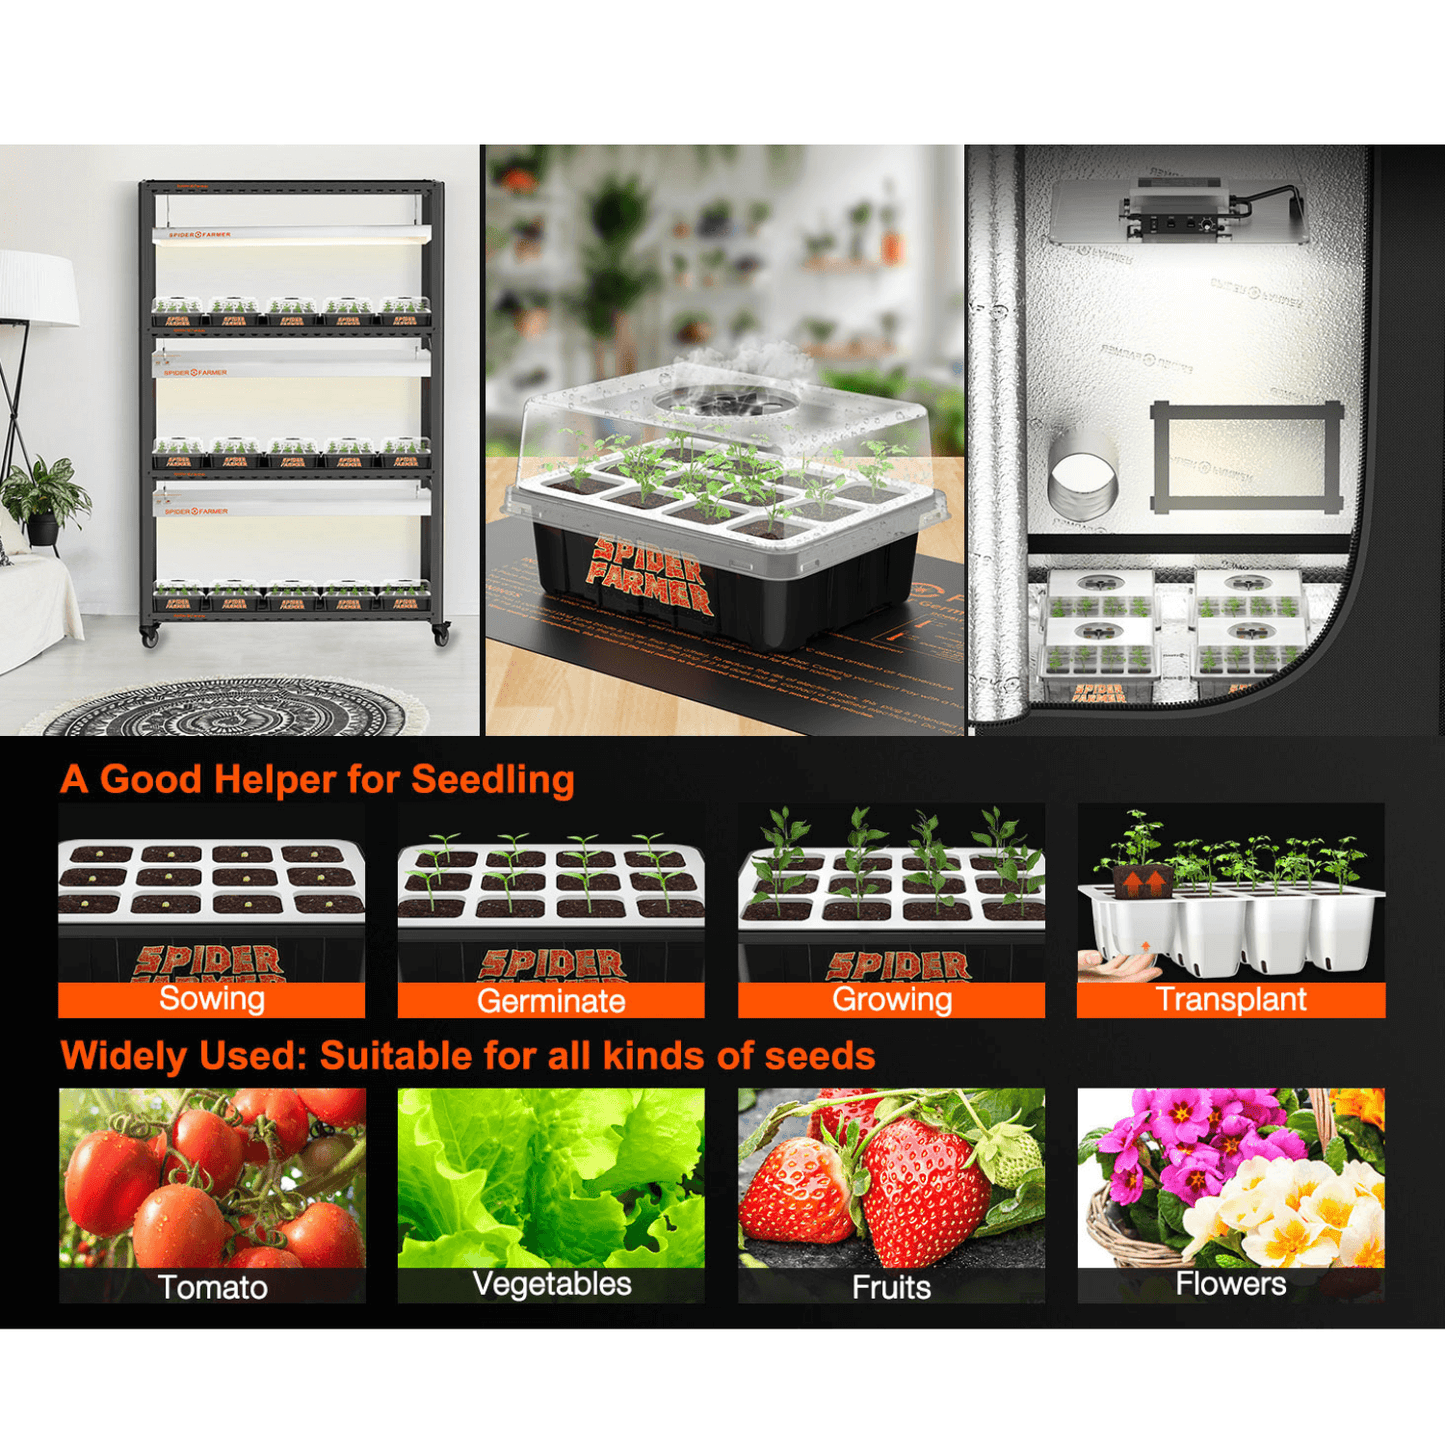 Spider Farmer Seed Starting Trays 2 Pack | SPIDER-SF-Seedtray-C | Grow Tents Depot | Planting & Watering | 6973280379576